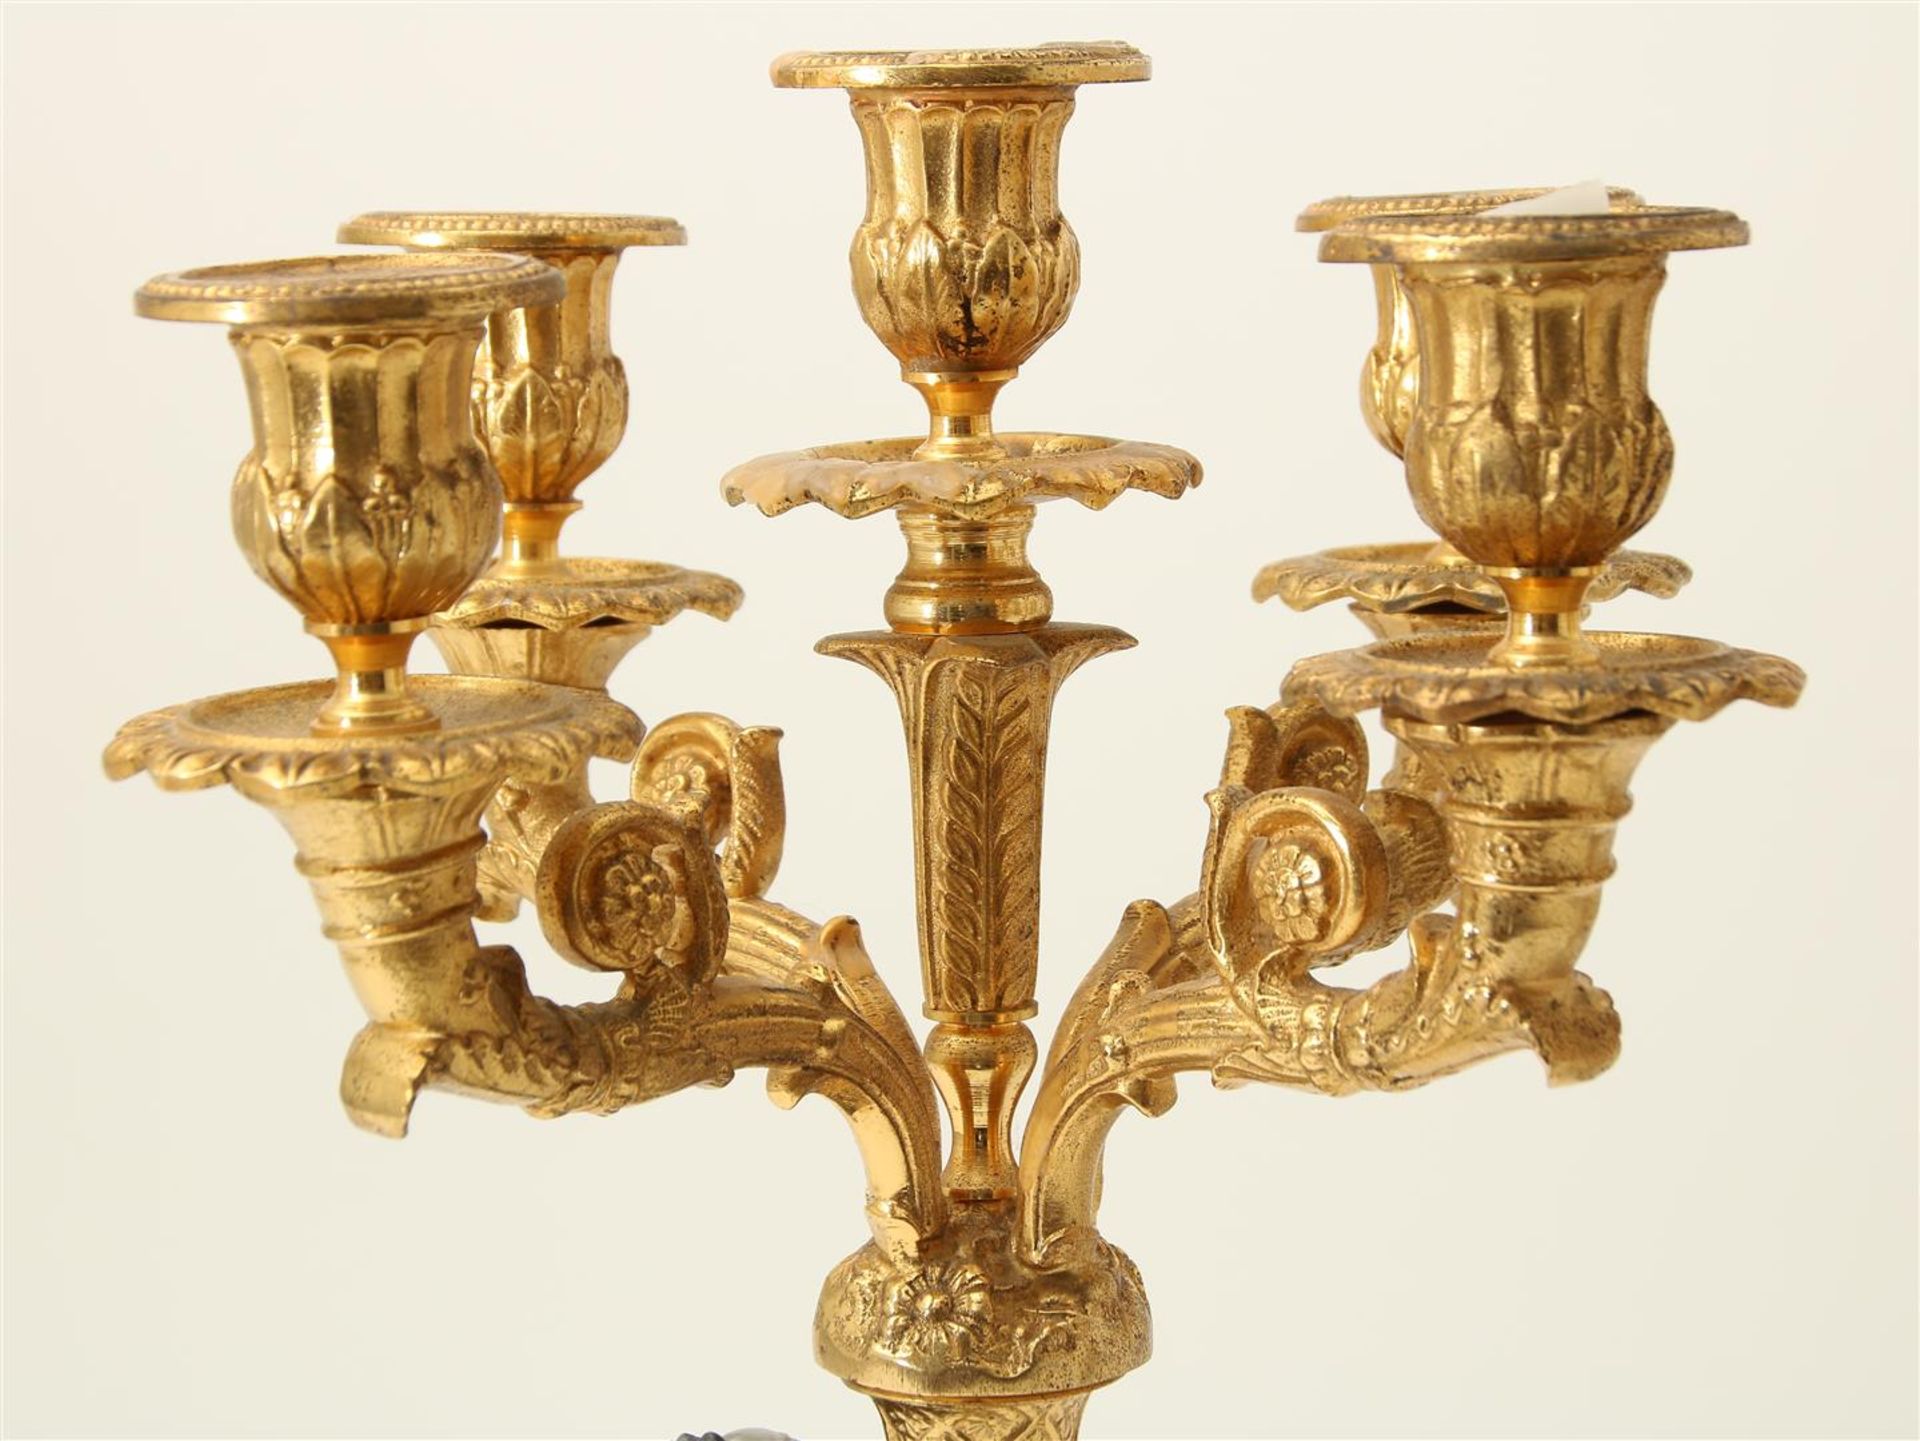 Set of bronze Empire style 5 light candlesticks carried by man and woman, France 20th century, - Image 2 of 6